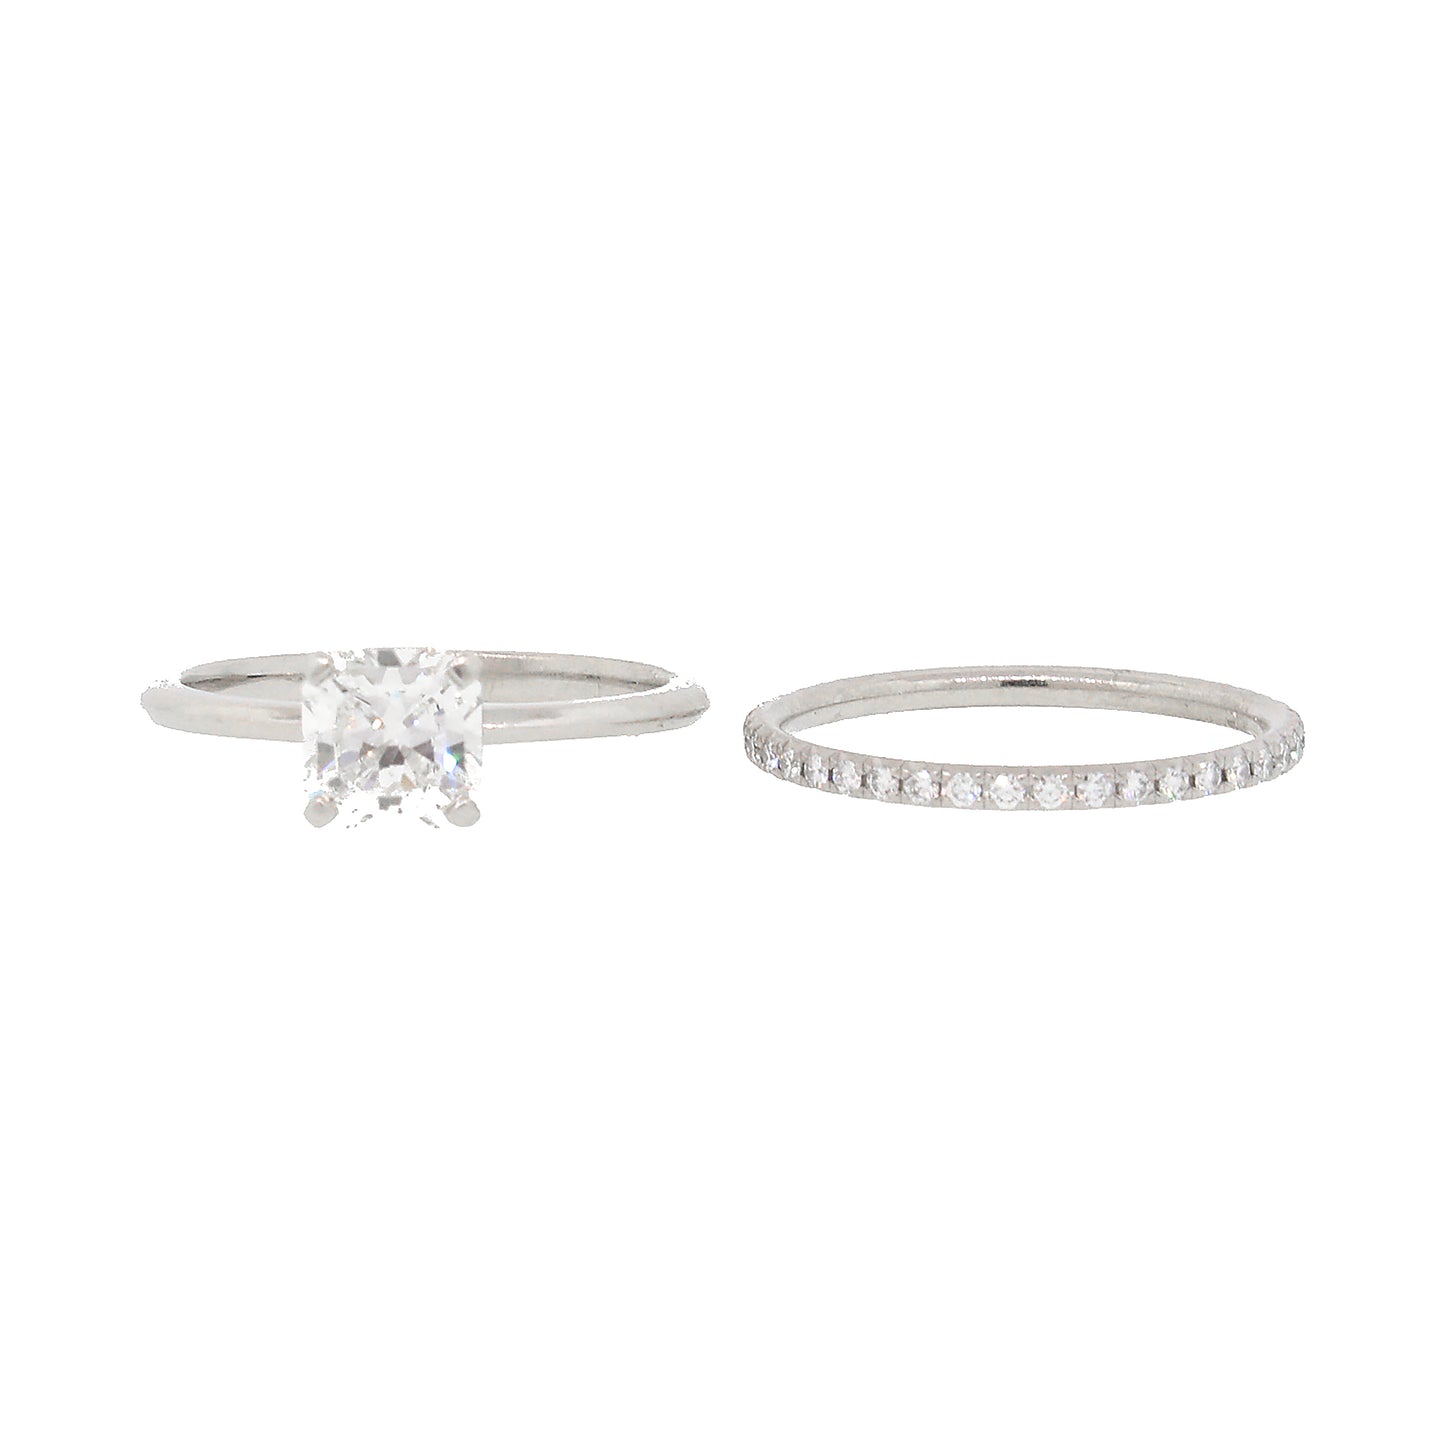 Tiffany and Co. TRUE Diamond Engagement Platinum Ring and Matching Wedding Band